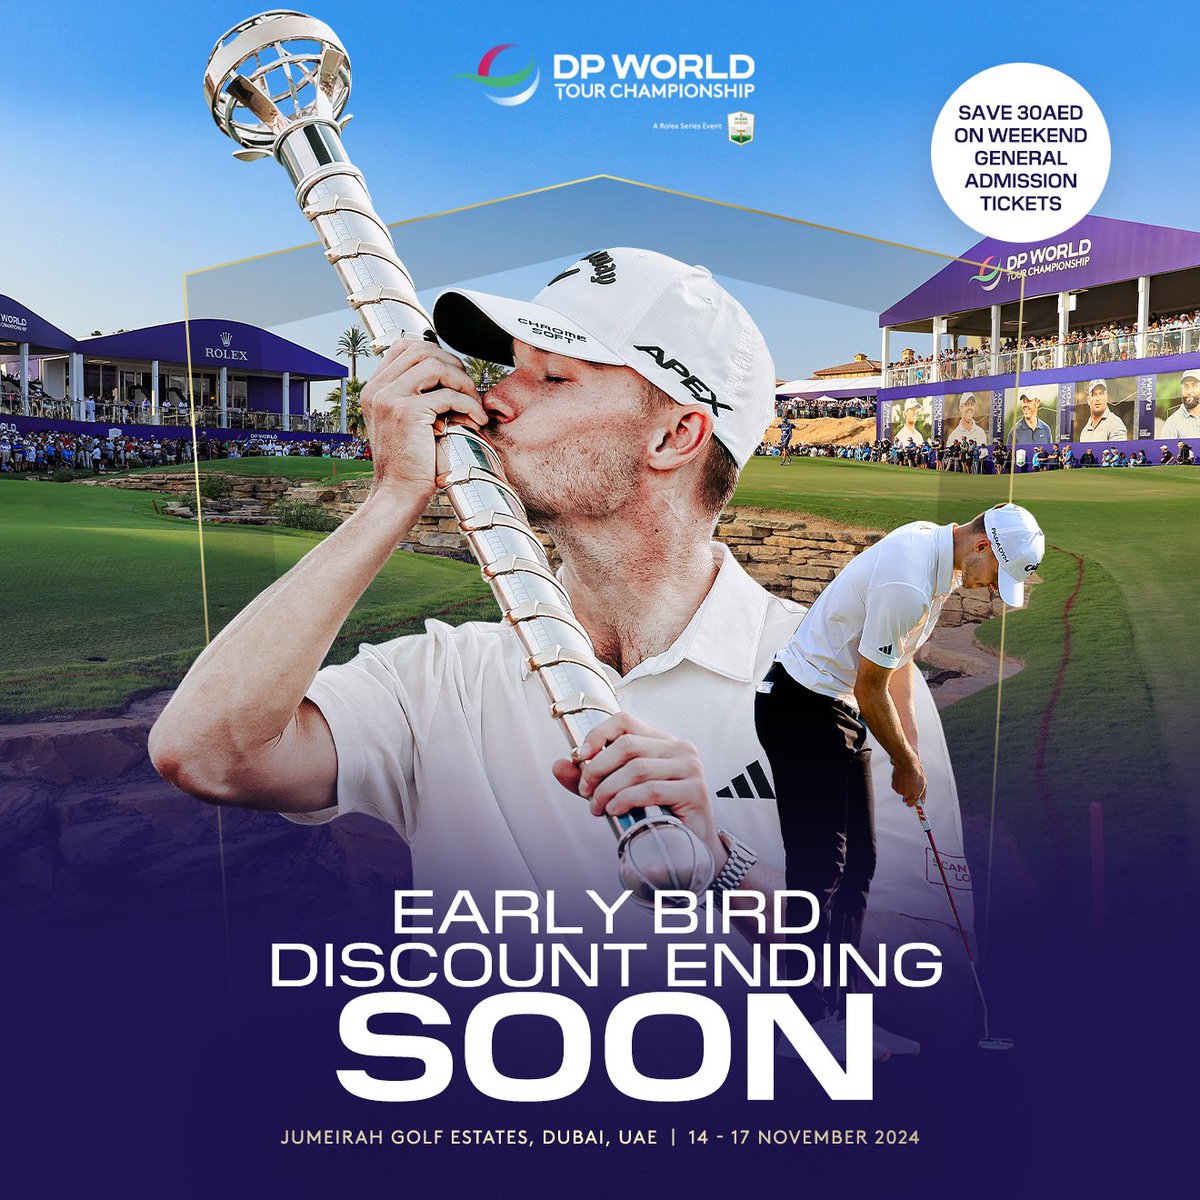 Save 30AED on weekend general admission tickets by taking advantage of our Early Bird discount! Ending soon ⏳ Buy here: bit.ly/3W9tOy6 #DPWTC #RolexSeries